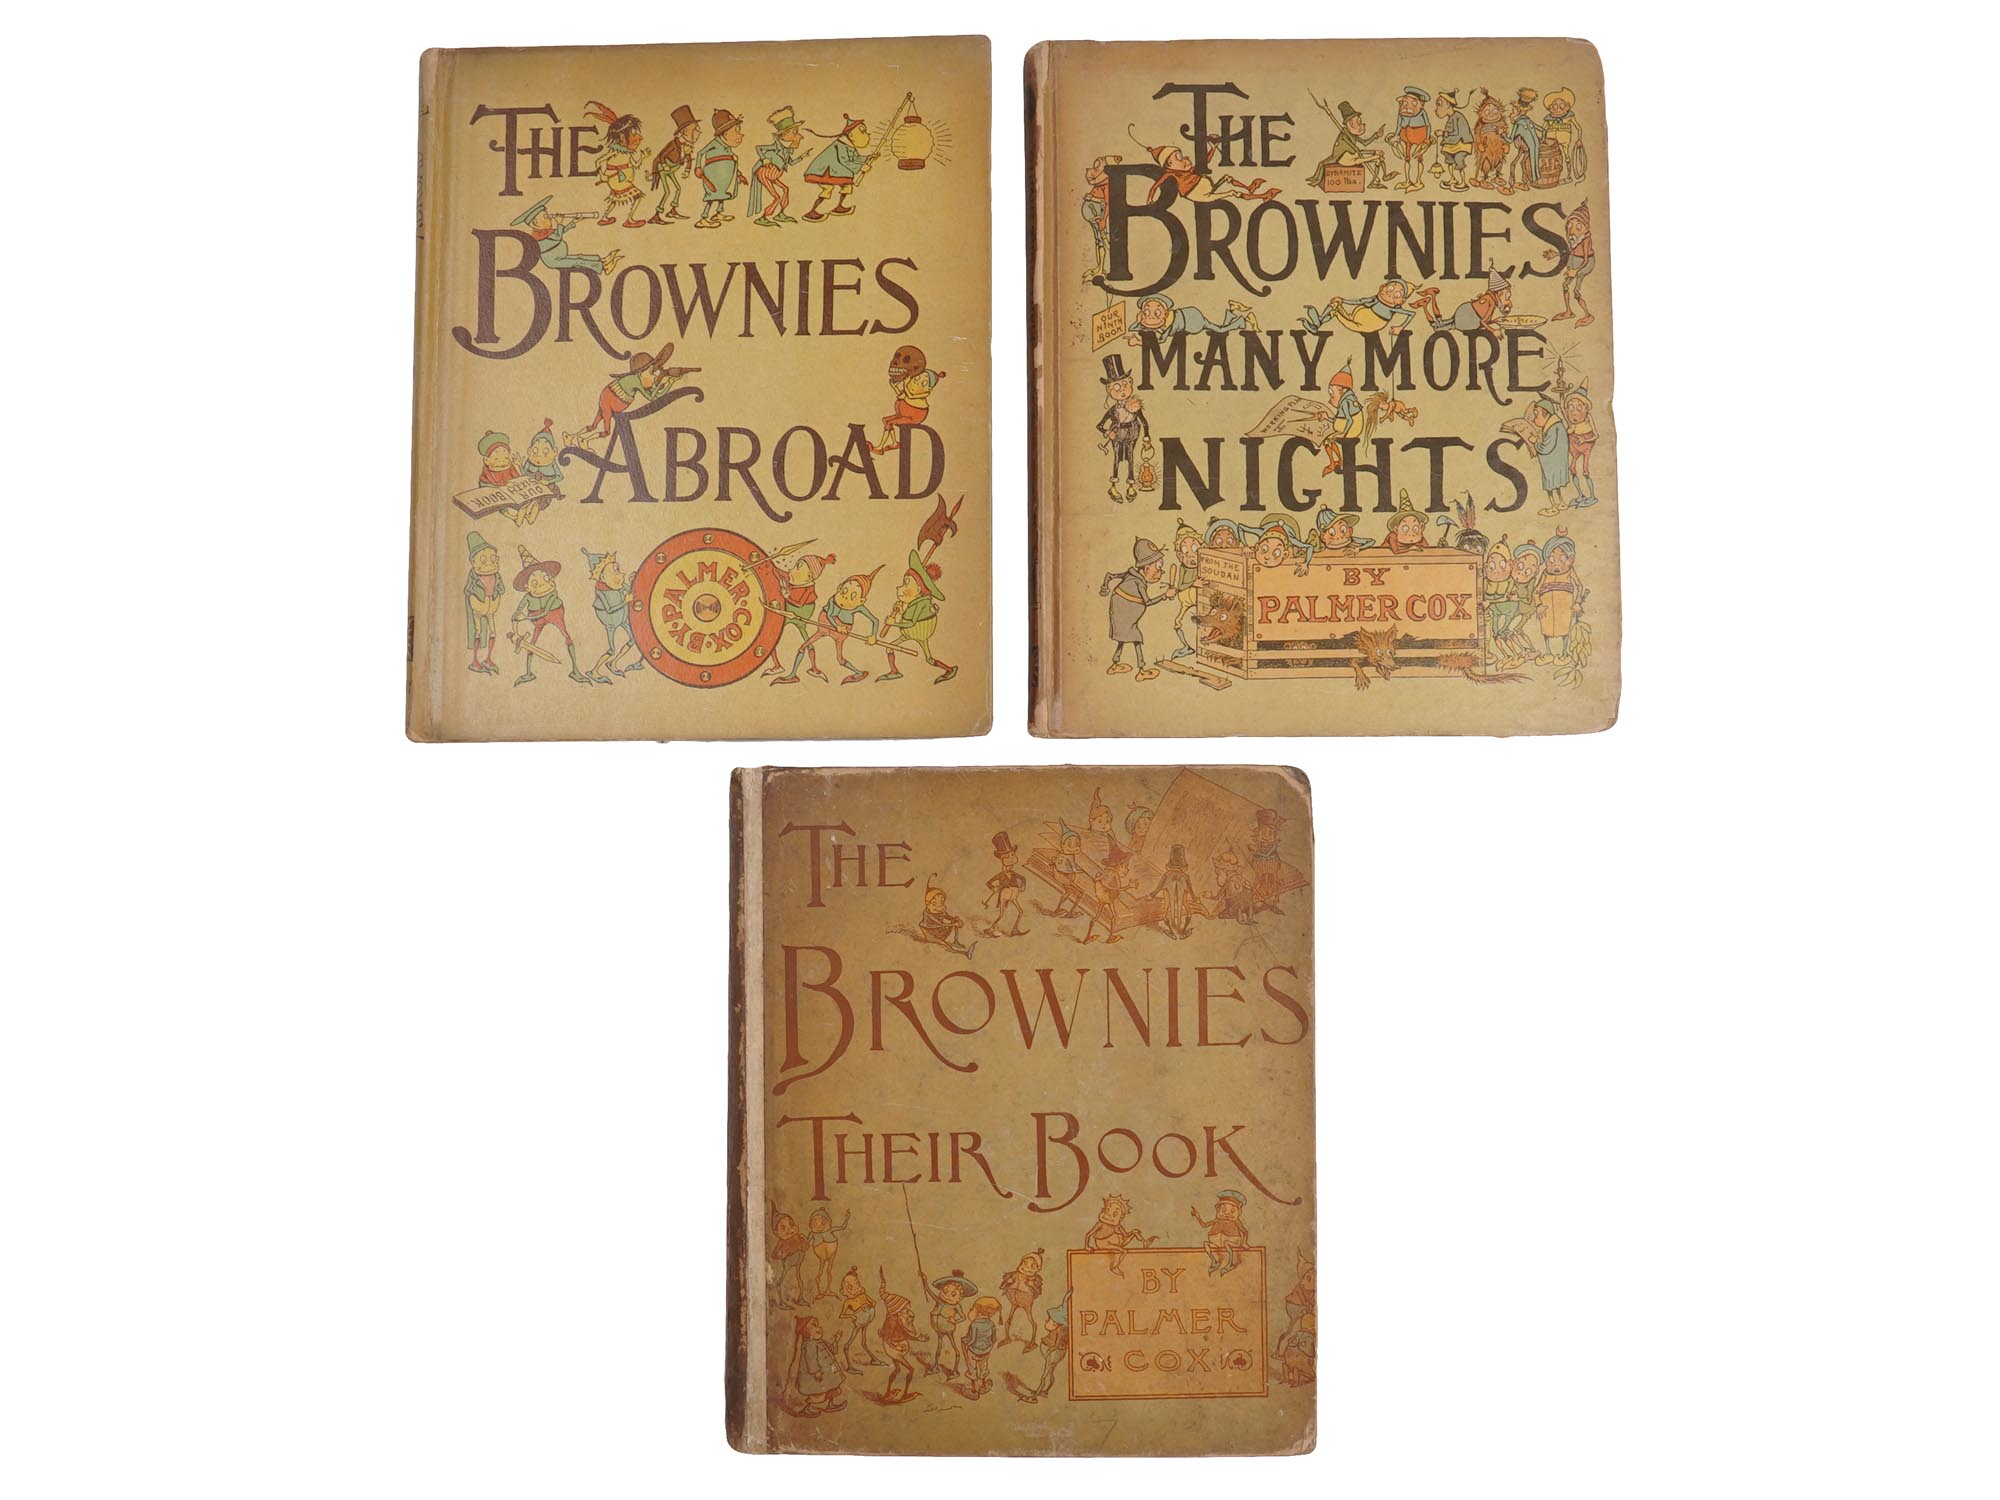 THE BROWNIES BOOKS BY PALMER COX FIRST EDITION PIC-0